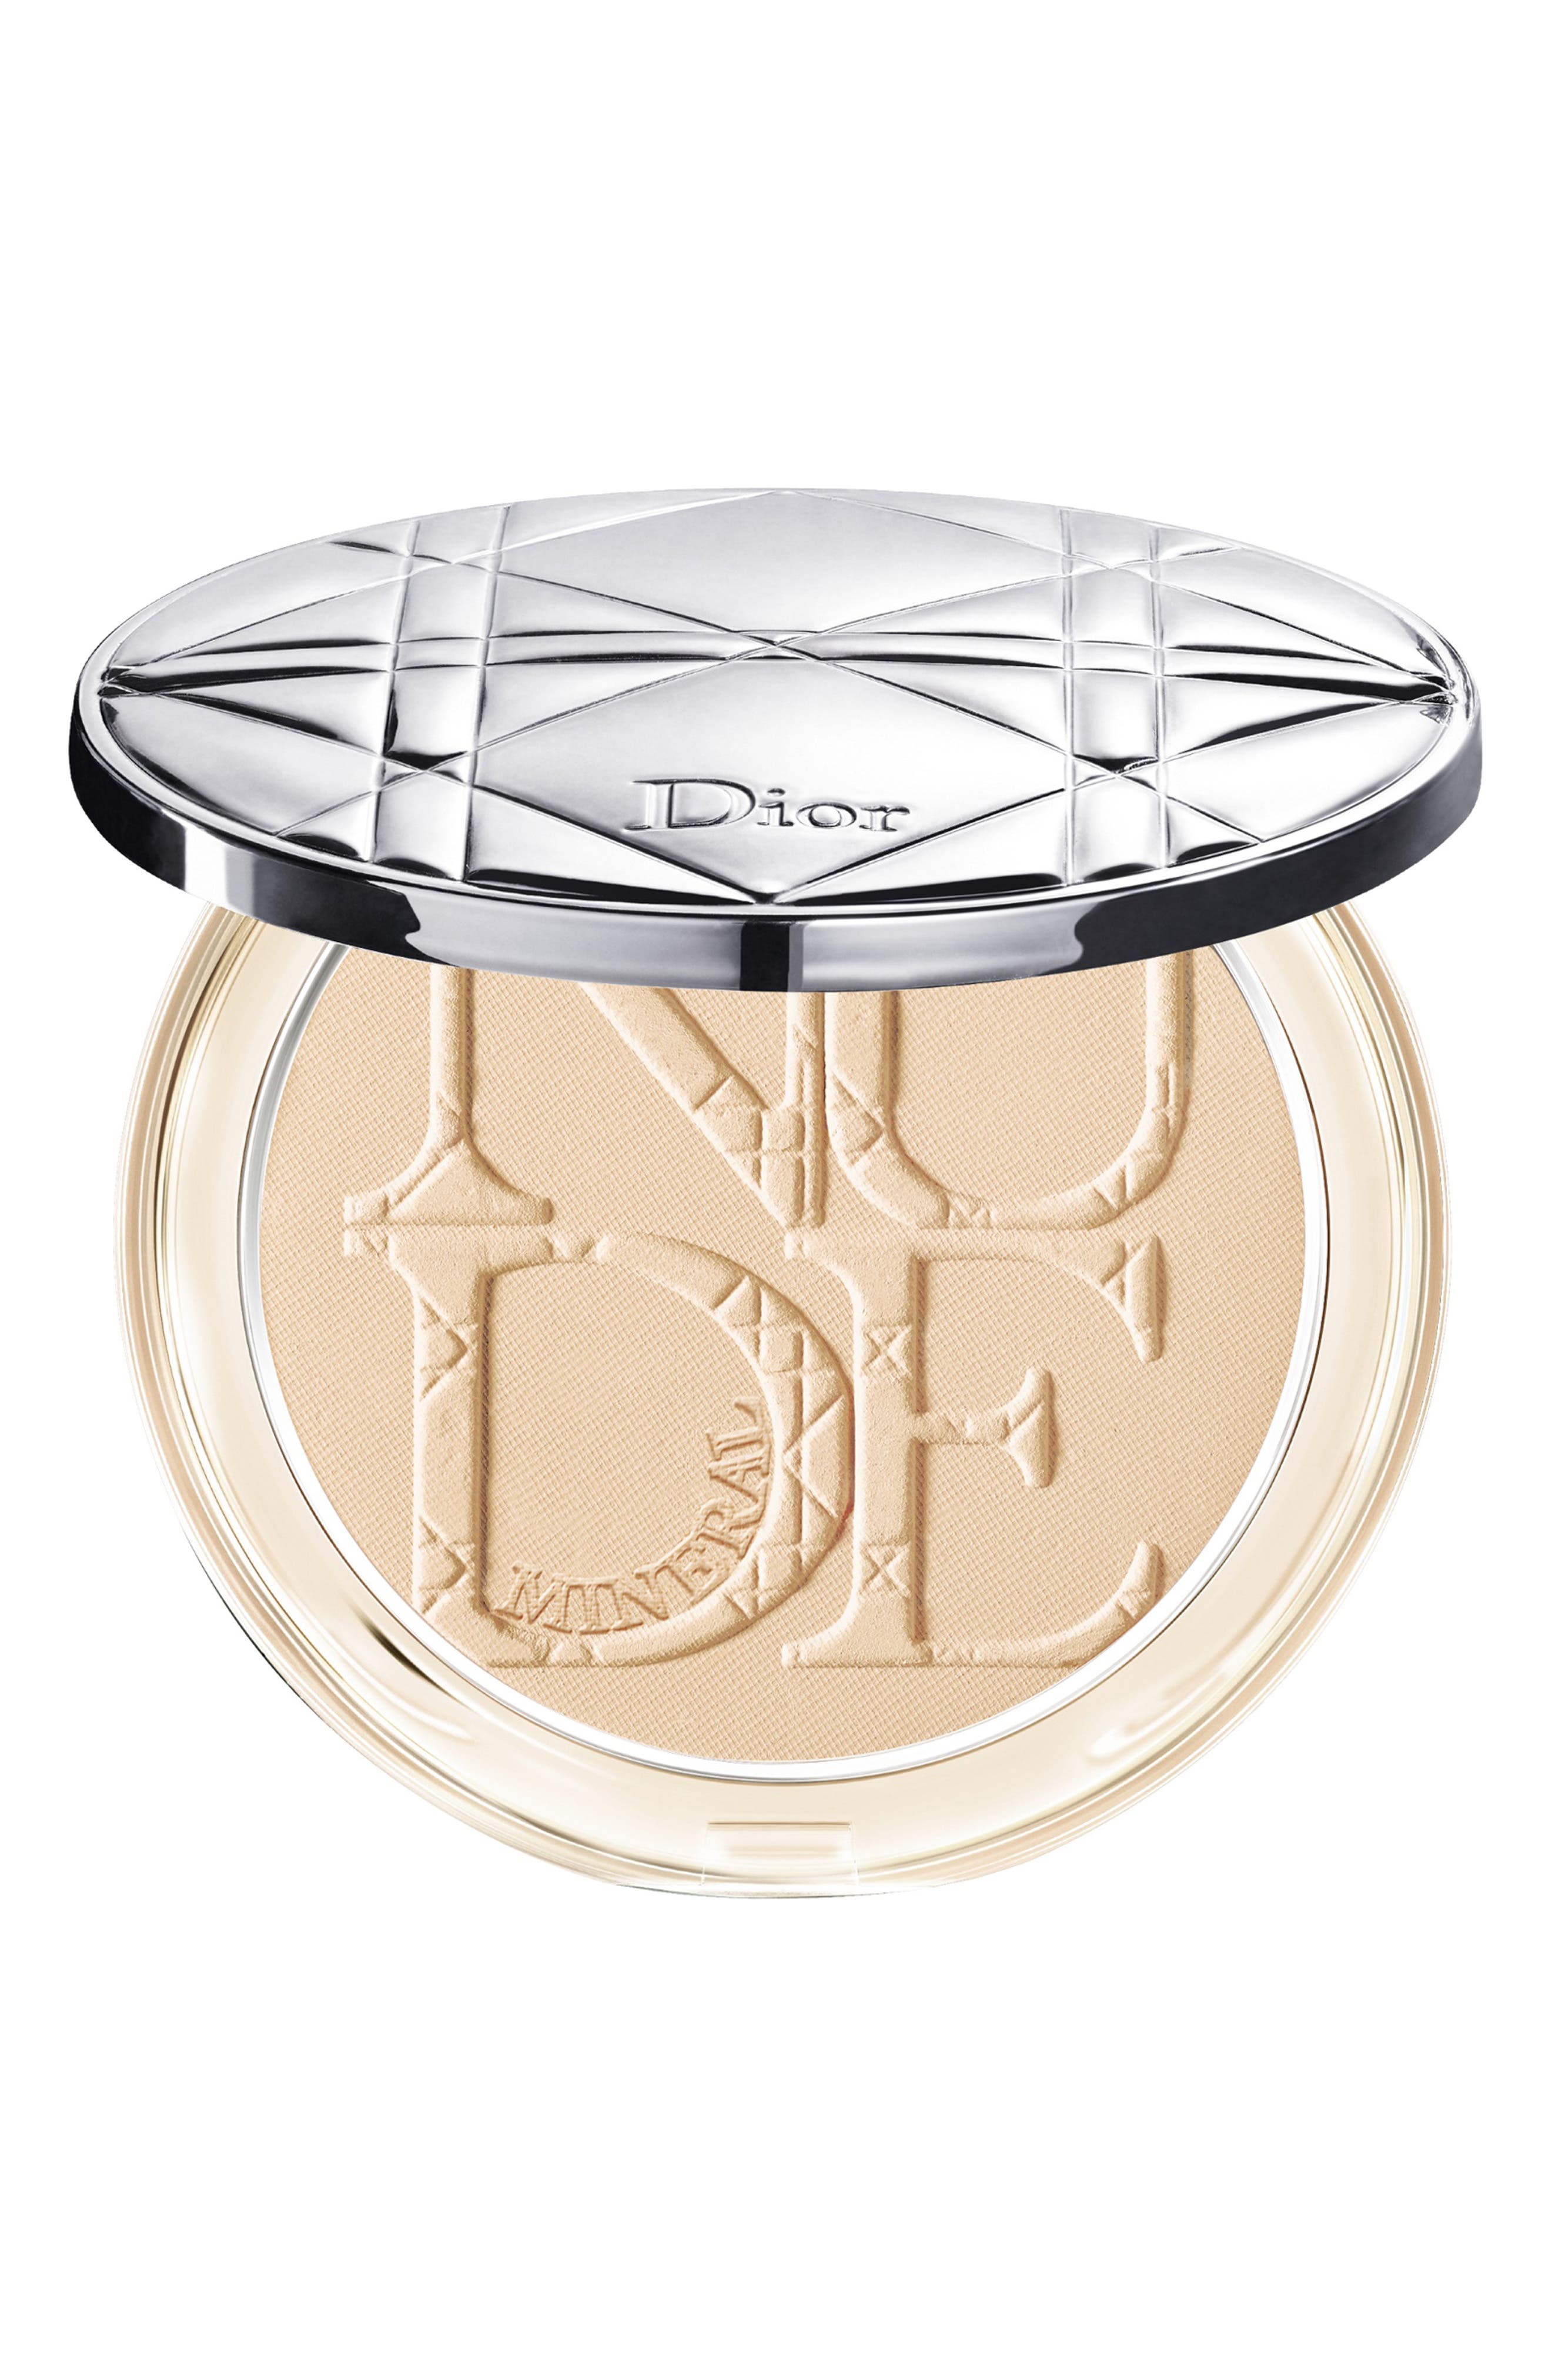 EAN 3348901456067 product image for Dior Diorskin Mineral Nude Matte Perfecting Powder - 002 Light | upcitemdb.com